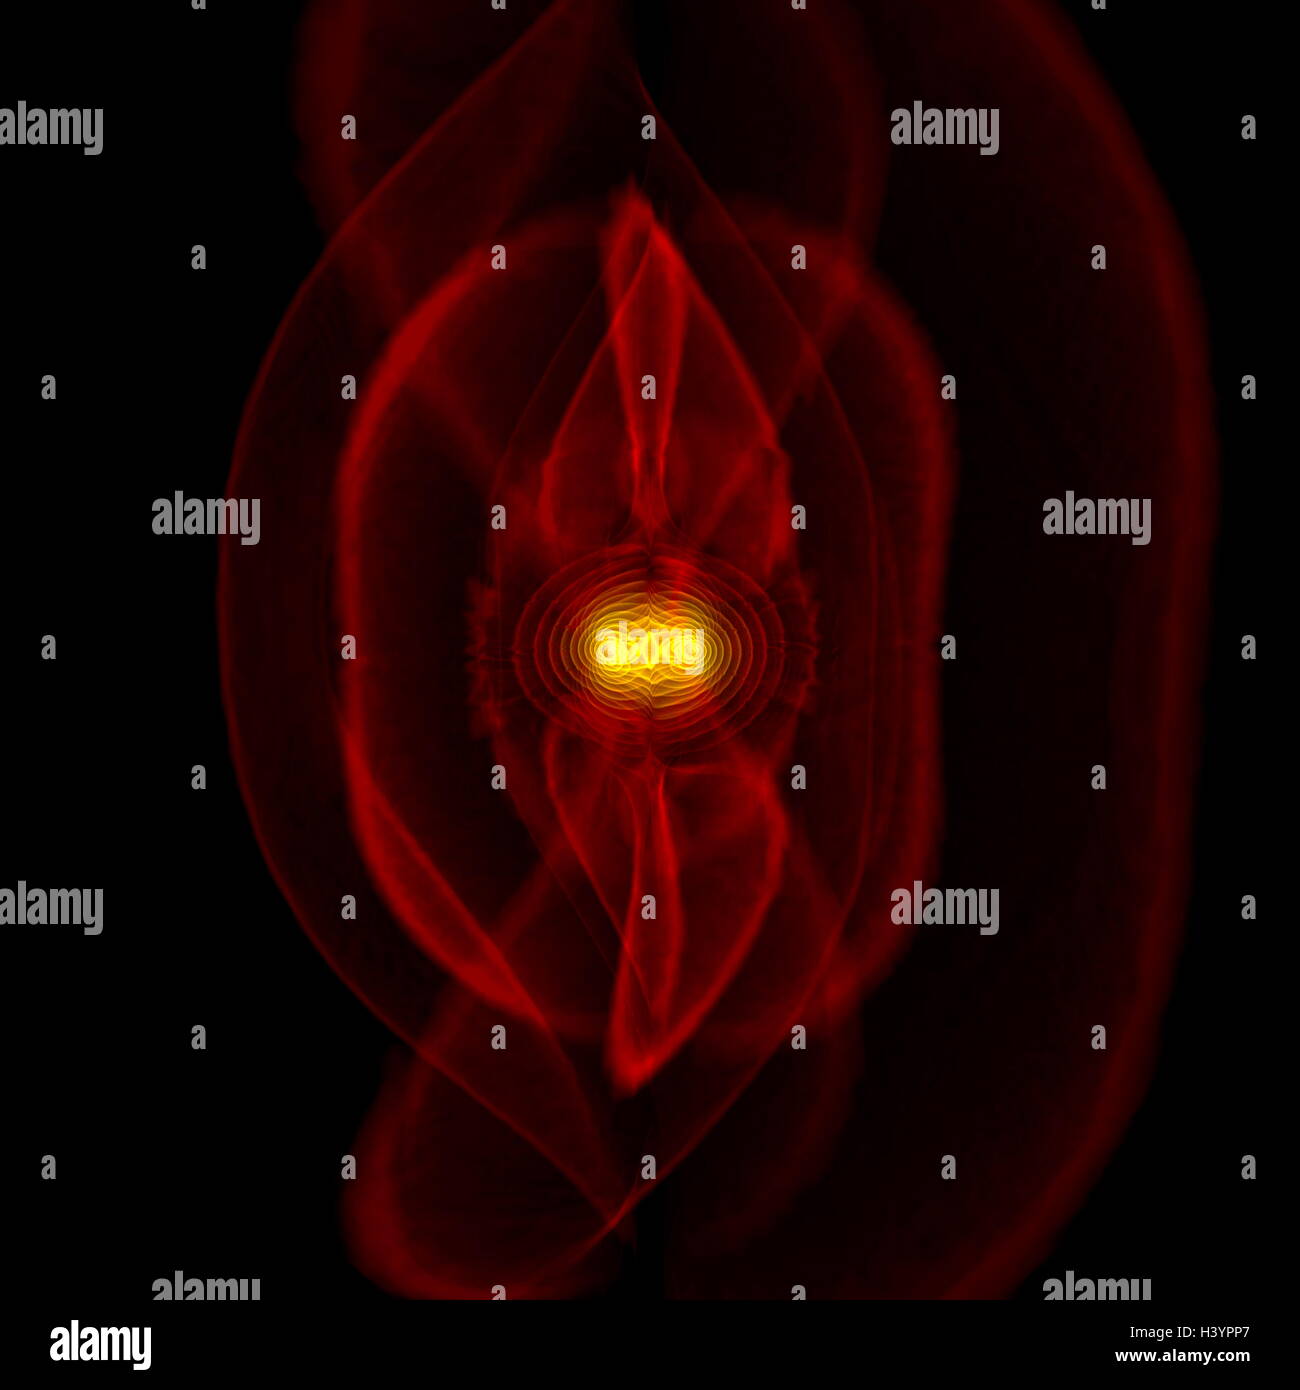 simulation of the merger of two black holes and the emission of gravitational radiation or waves (coloured fields, which represent a component of the curvature of space-time). The red areas near the black holes do not correspond to physical structures but generally indicate where the strong non-linear gravitational-field interactions are in play. Stock Photo